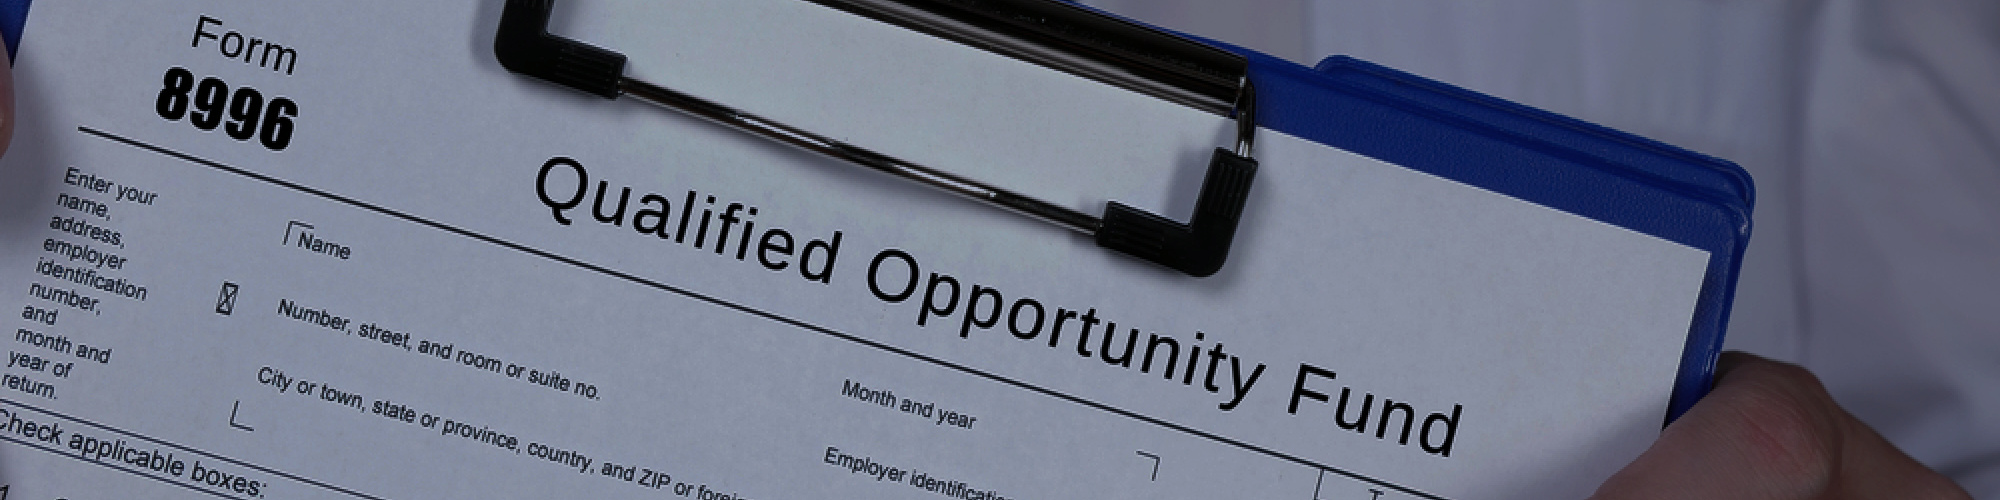 Advanced Planning: Qualified Opportunity Funds